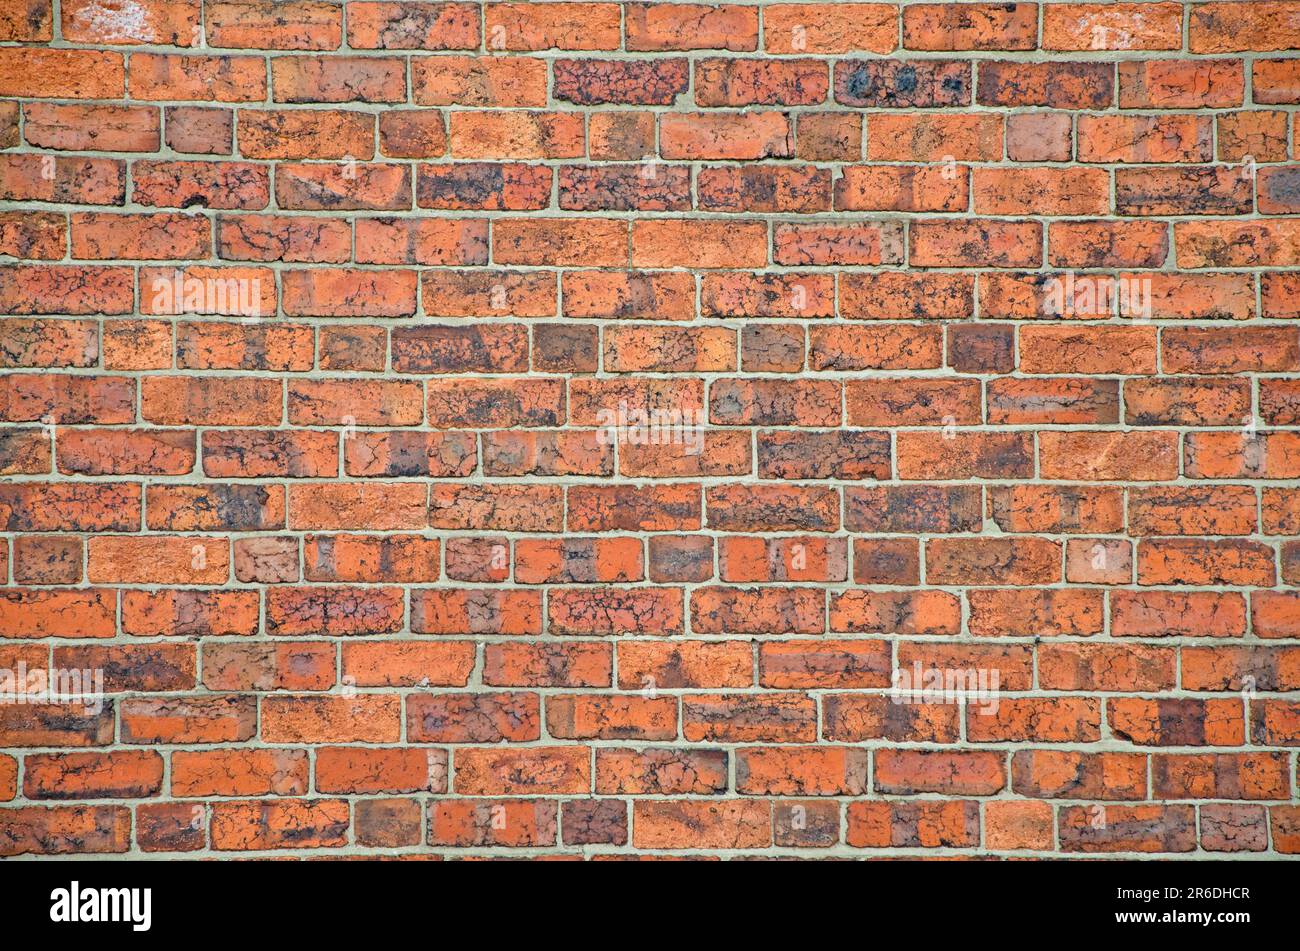 Full frame image of red brick wall, copy space Stock Photo